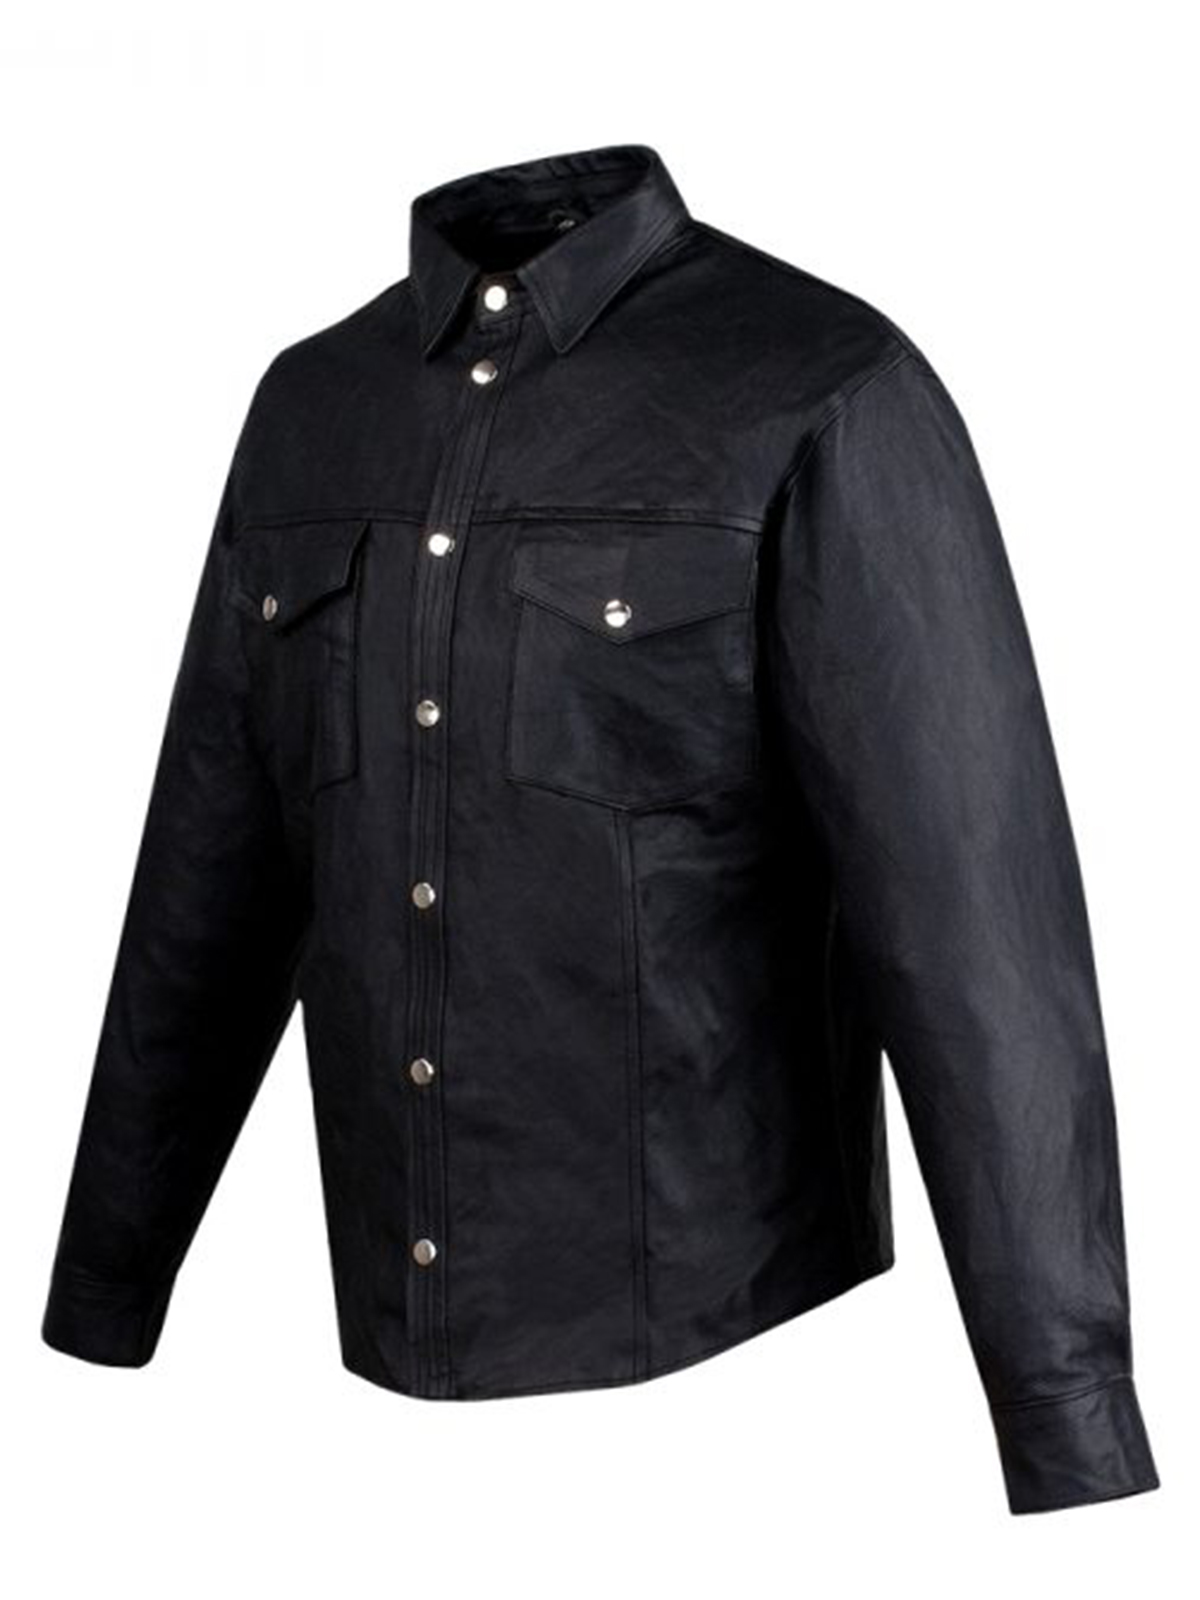 New Men’s Black Leather Buttoned Shirt Sale – Bay Perfect